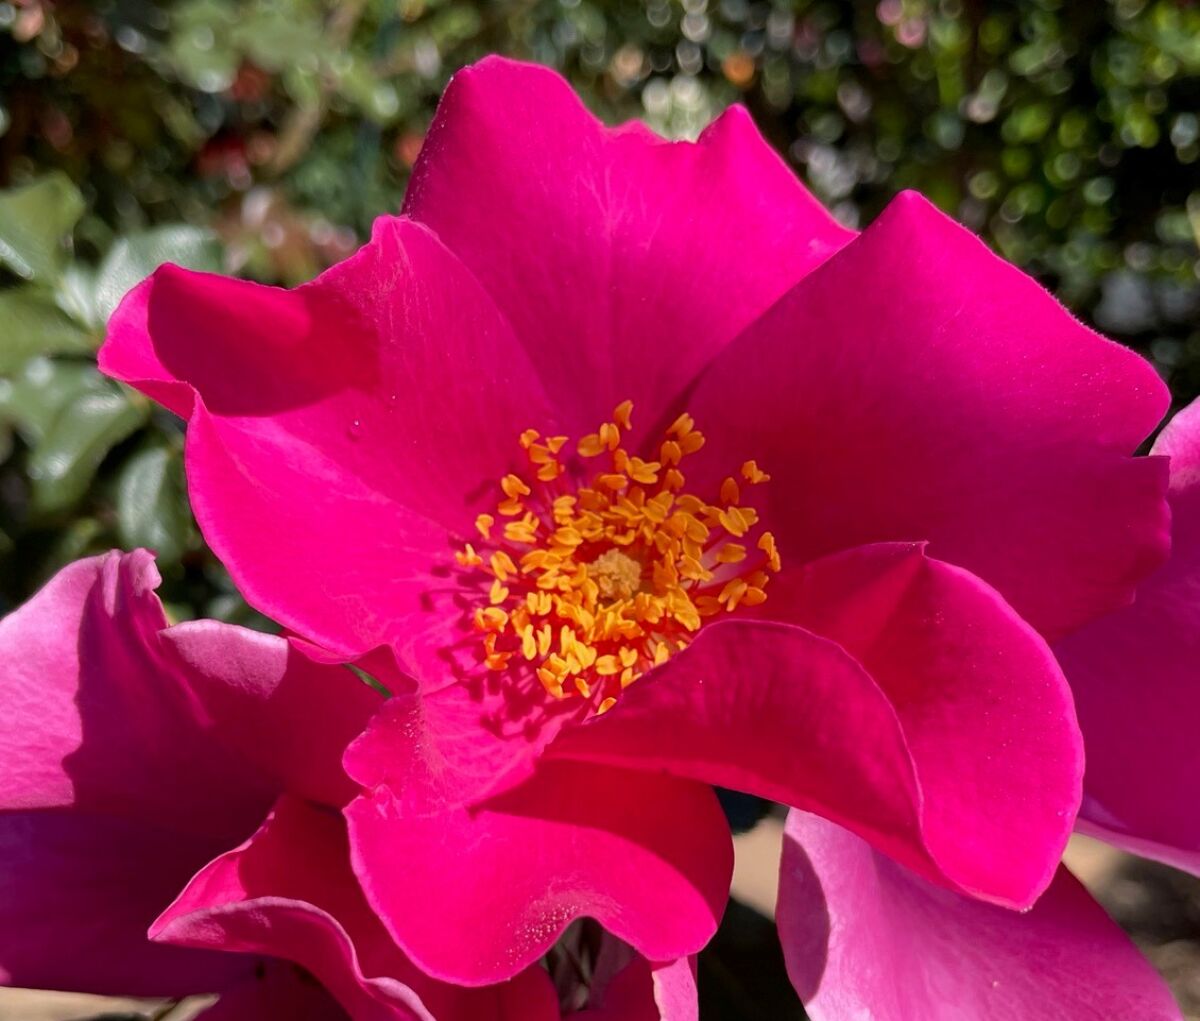 The ‘Playgirl’ rose, with deep pink petals and gold stamen, has a single bloom, with four to eight petals.